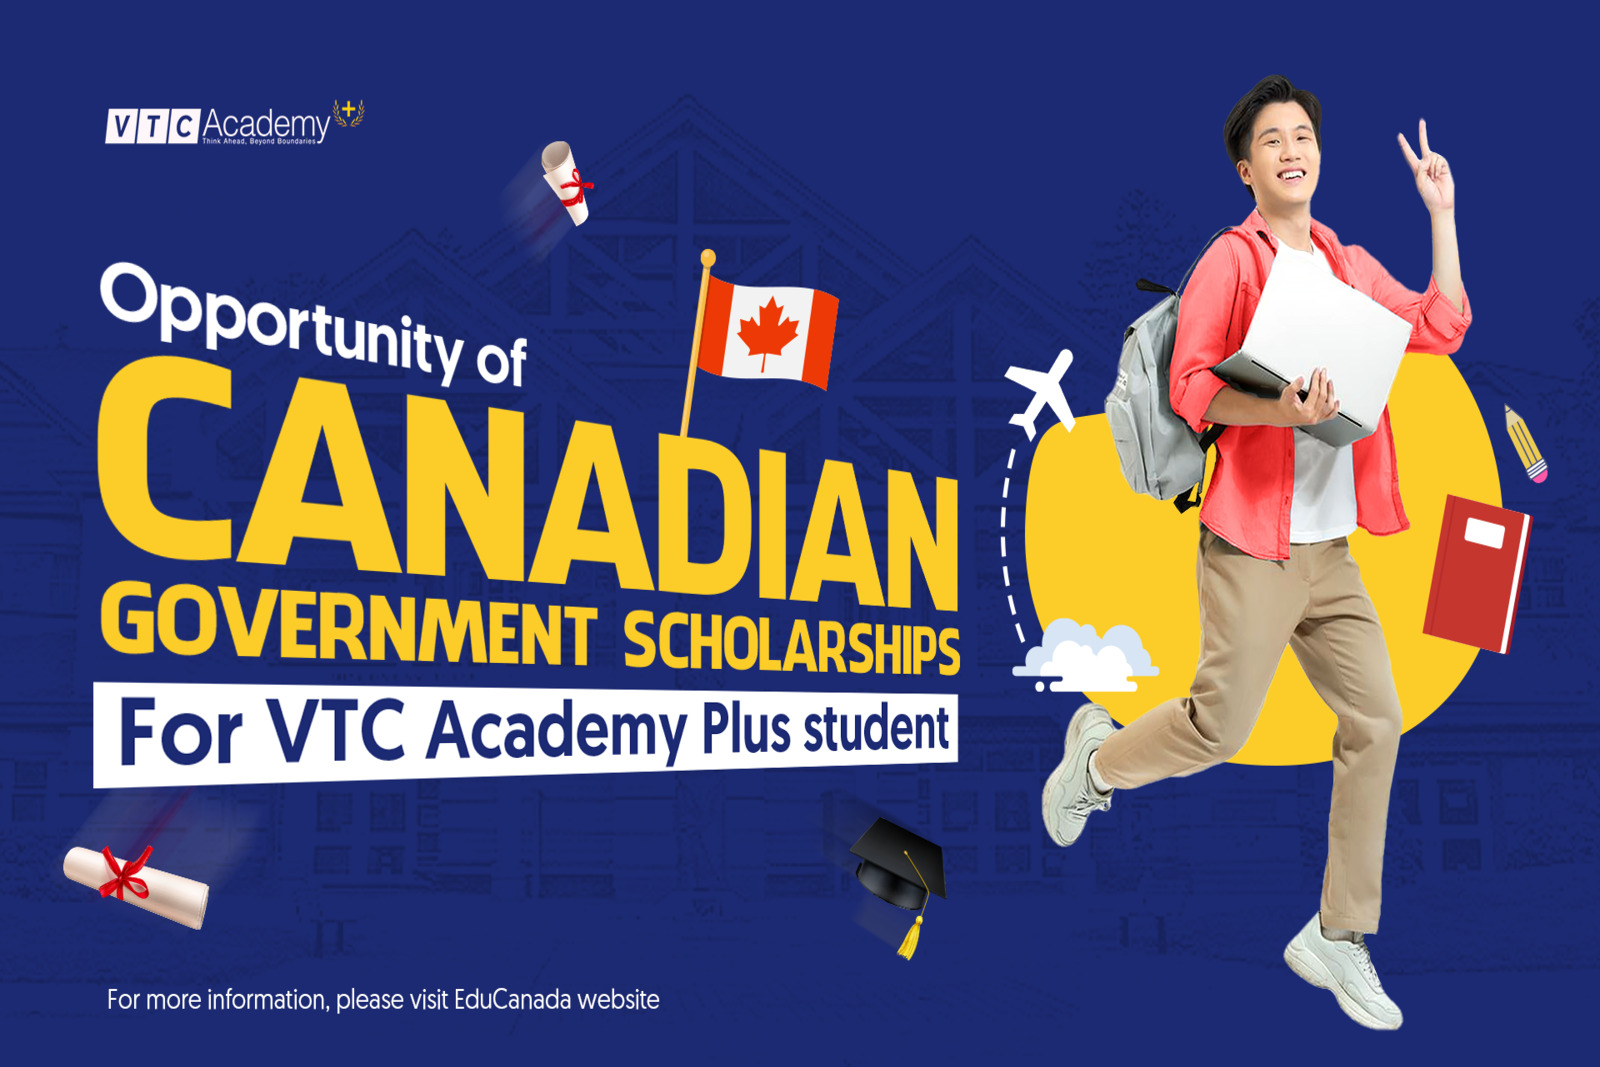 Canadian Government Scholarships - Opportunity for VTC Academy Plus students to study at NIC